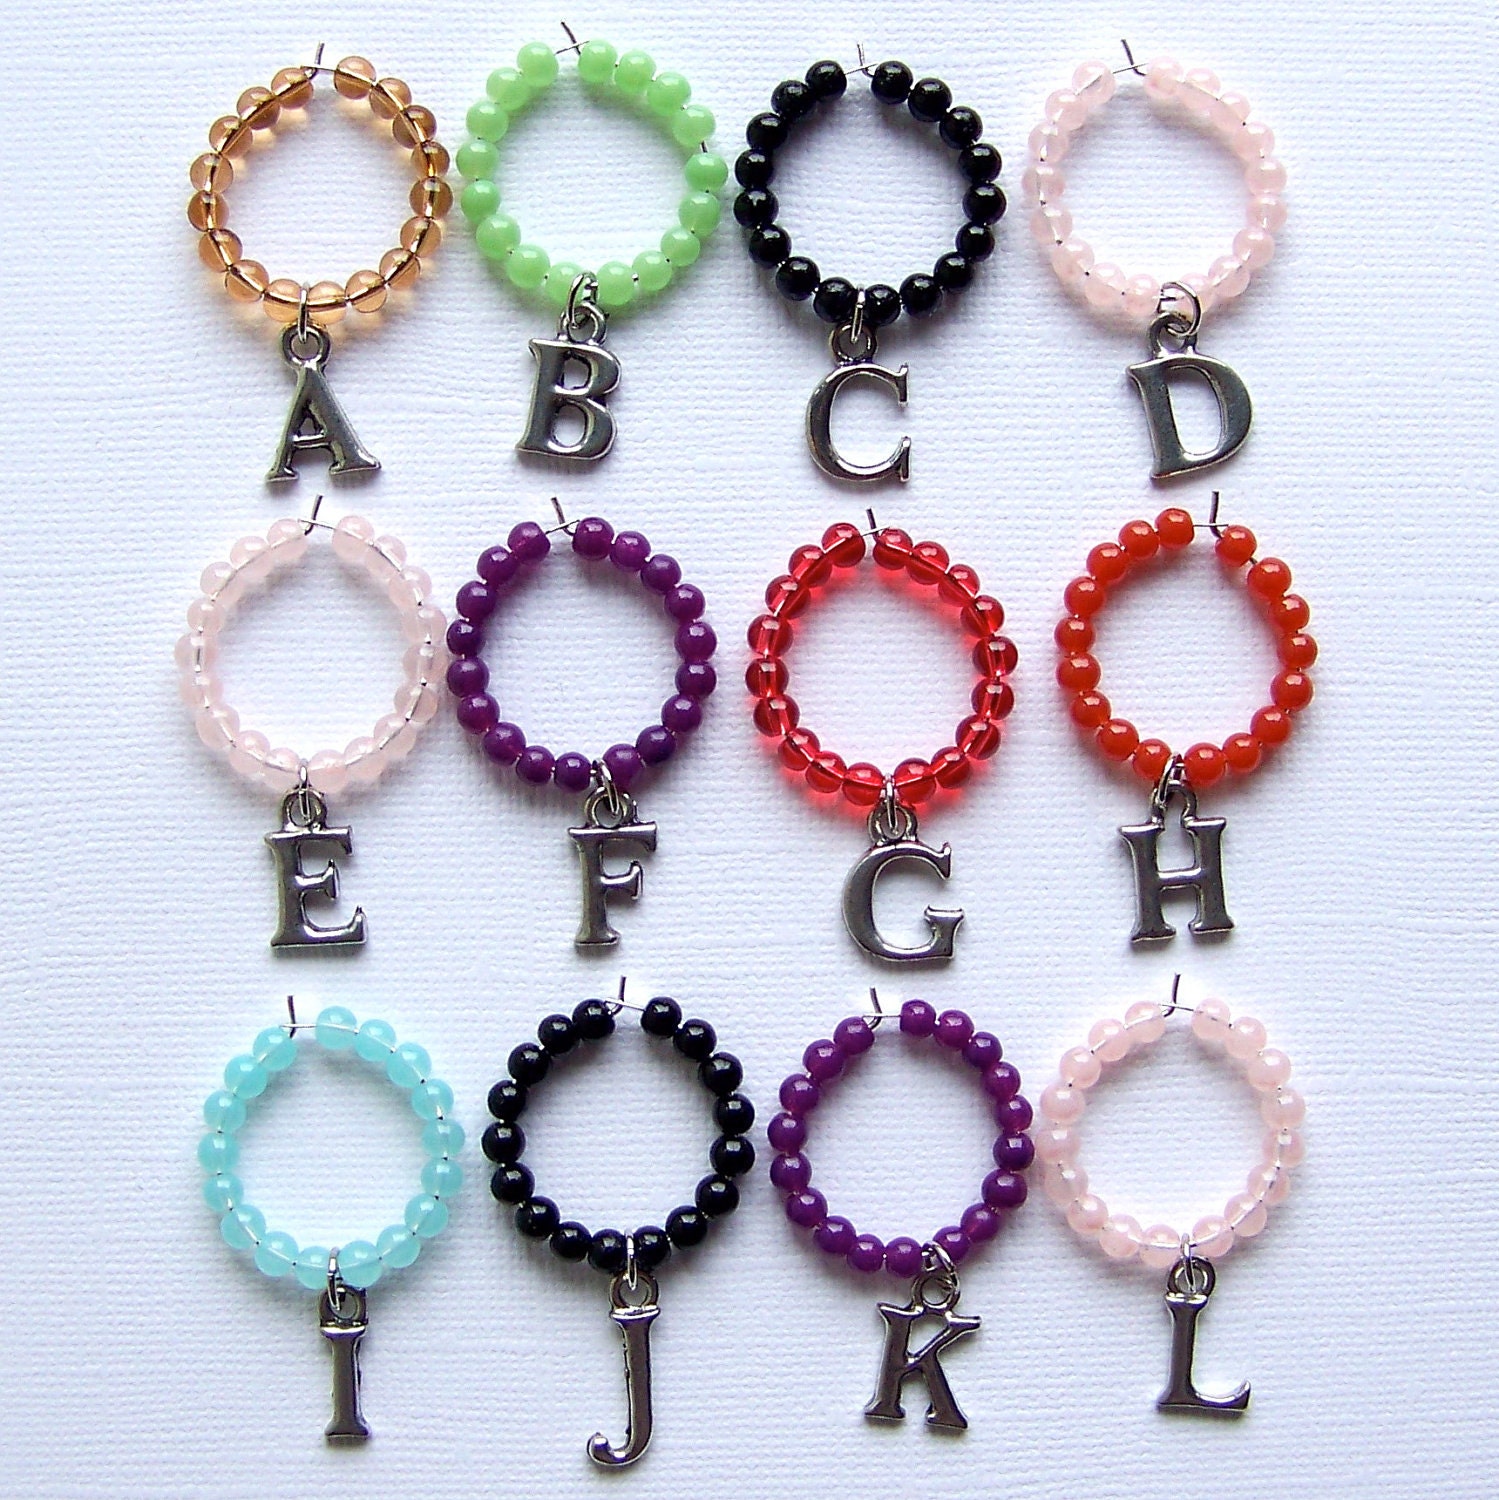 Alphabet Wine Glass Charms - Set of 6 - Your Choice of Letters